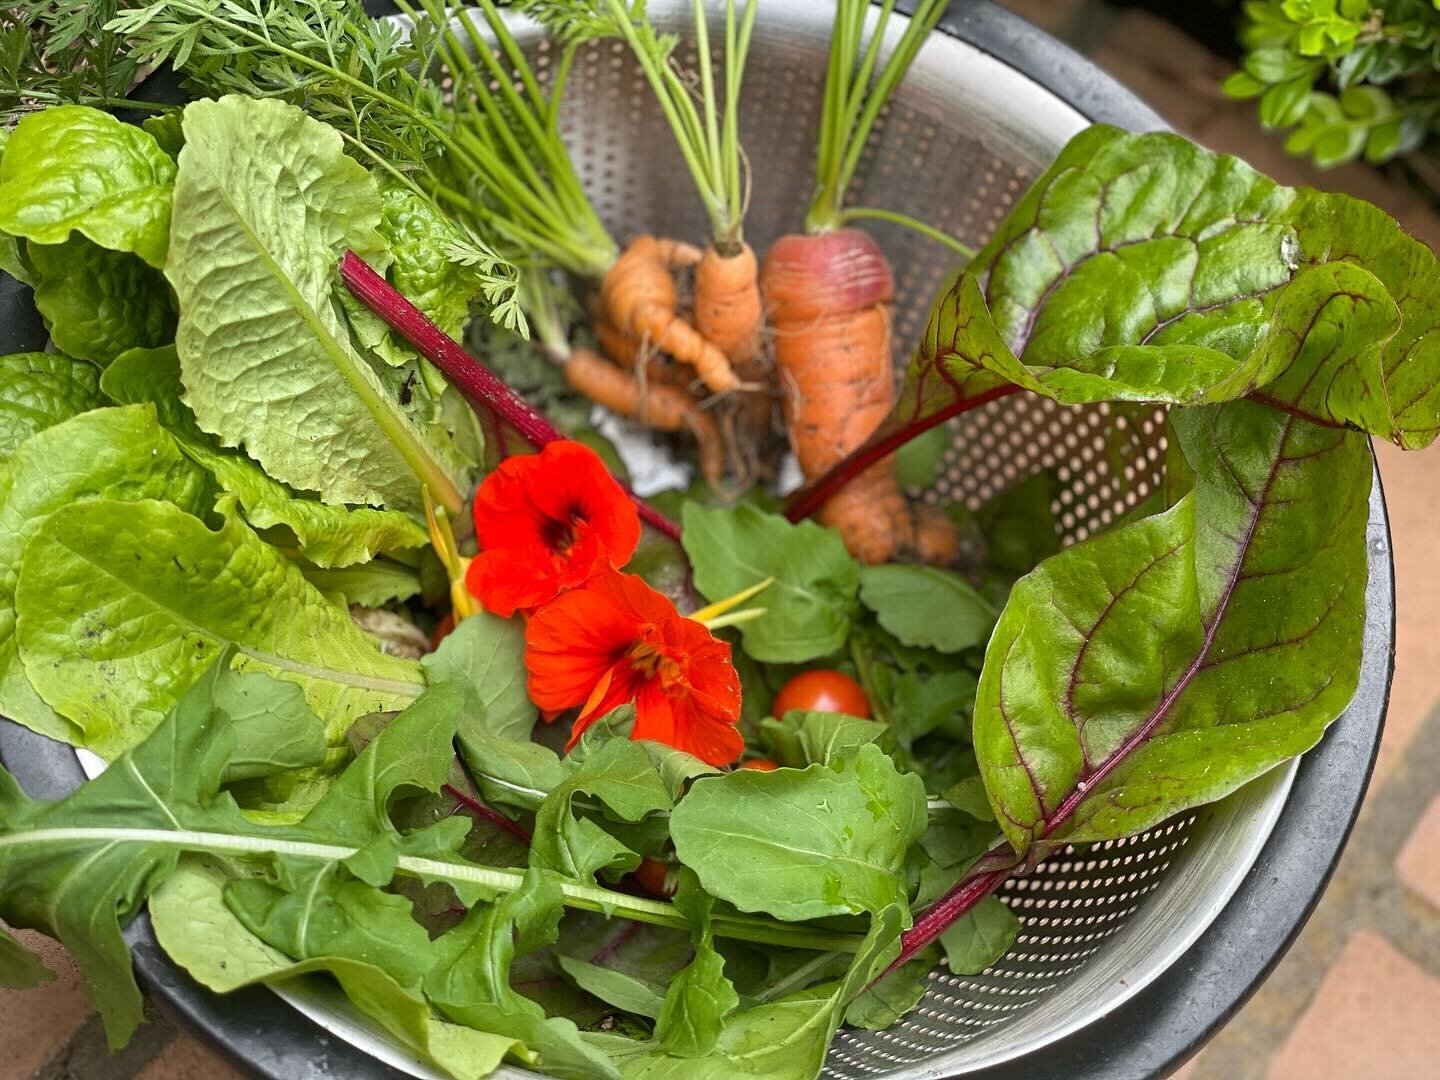 First #salad from the #potager with #bib #lettuce, #swisschard, #arugula, naval #carrots, volunteer #cherrytomatoes🍅, and #nasturtium #flowers.  So #delicious with a simple #vinaigrette!
#seasonalfood #spring #freshfood #simplicity 
#frenchcountryli